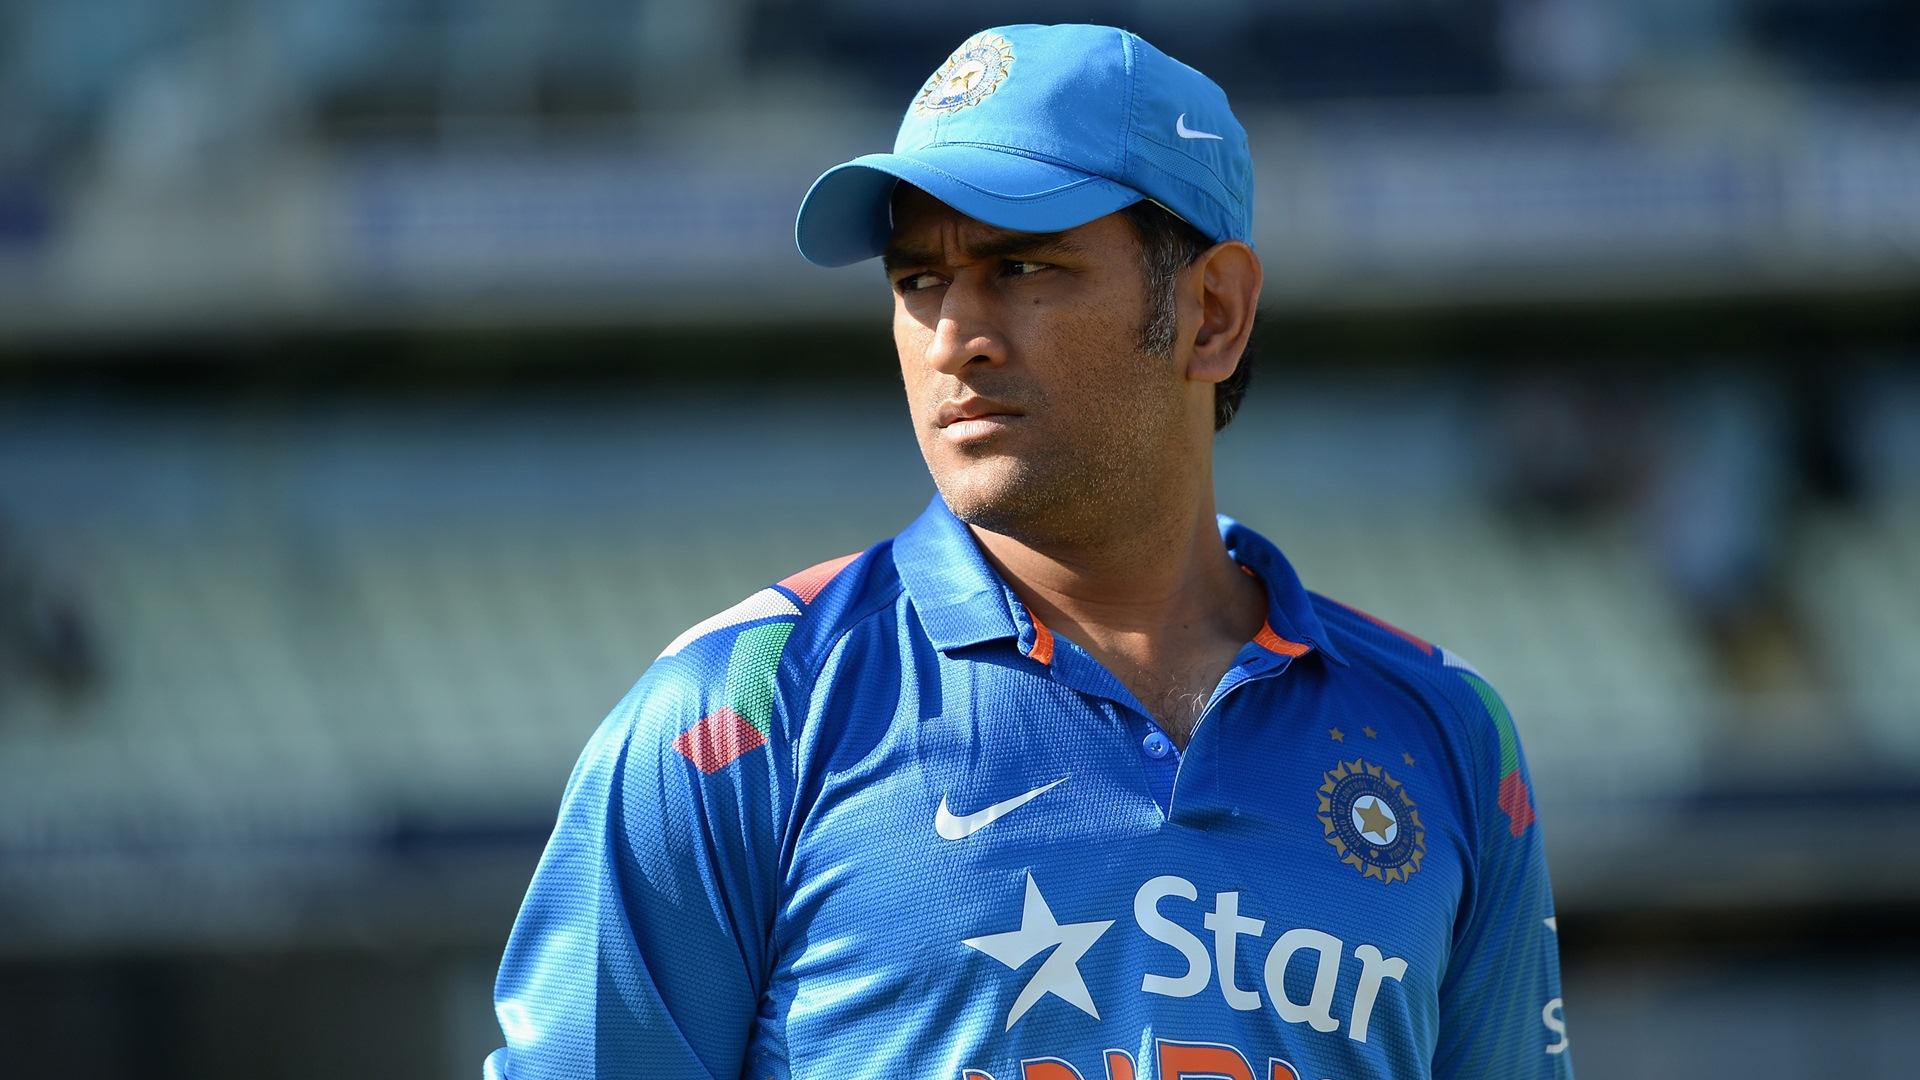 Ms Dhoni Wallpapers HD Backgrounds, Image, Pics, Photos Free